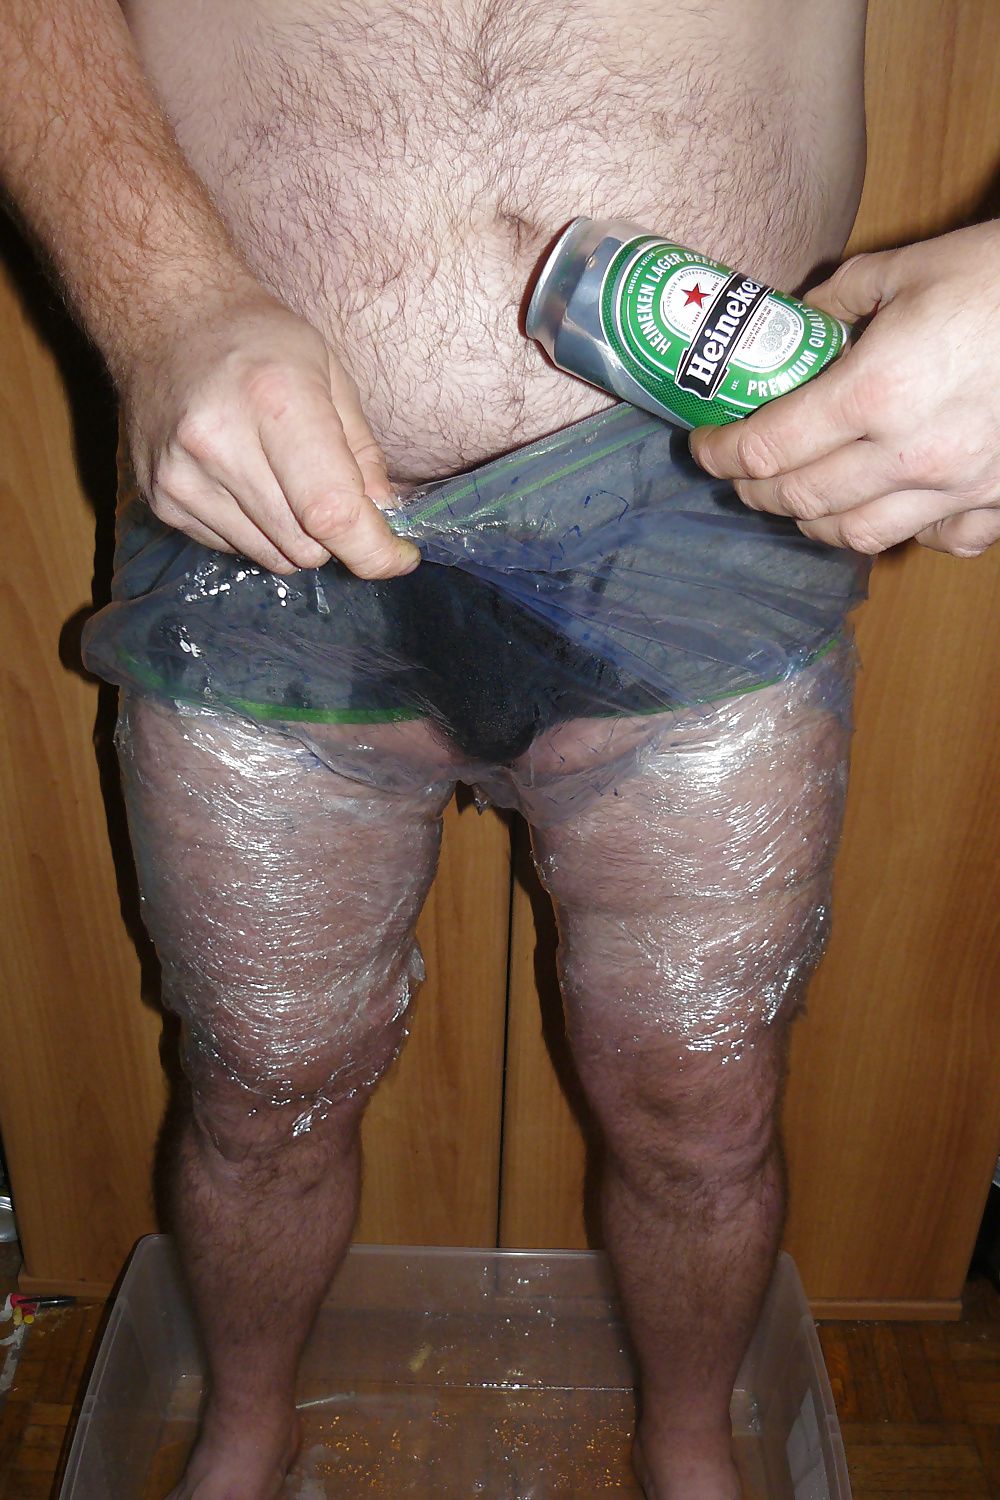 Humiliation with beer #11